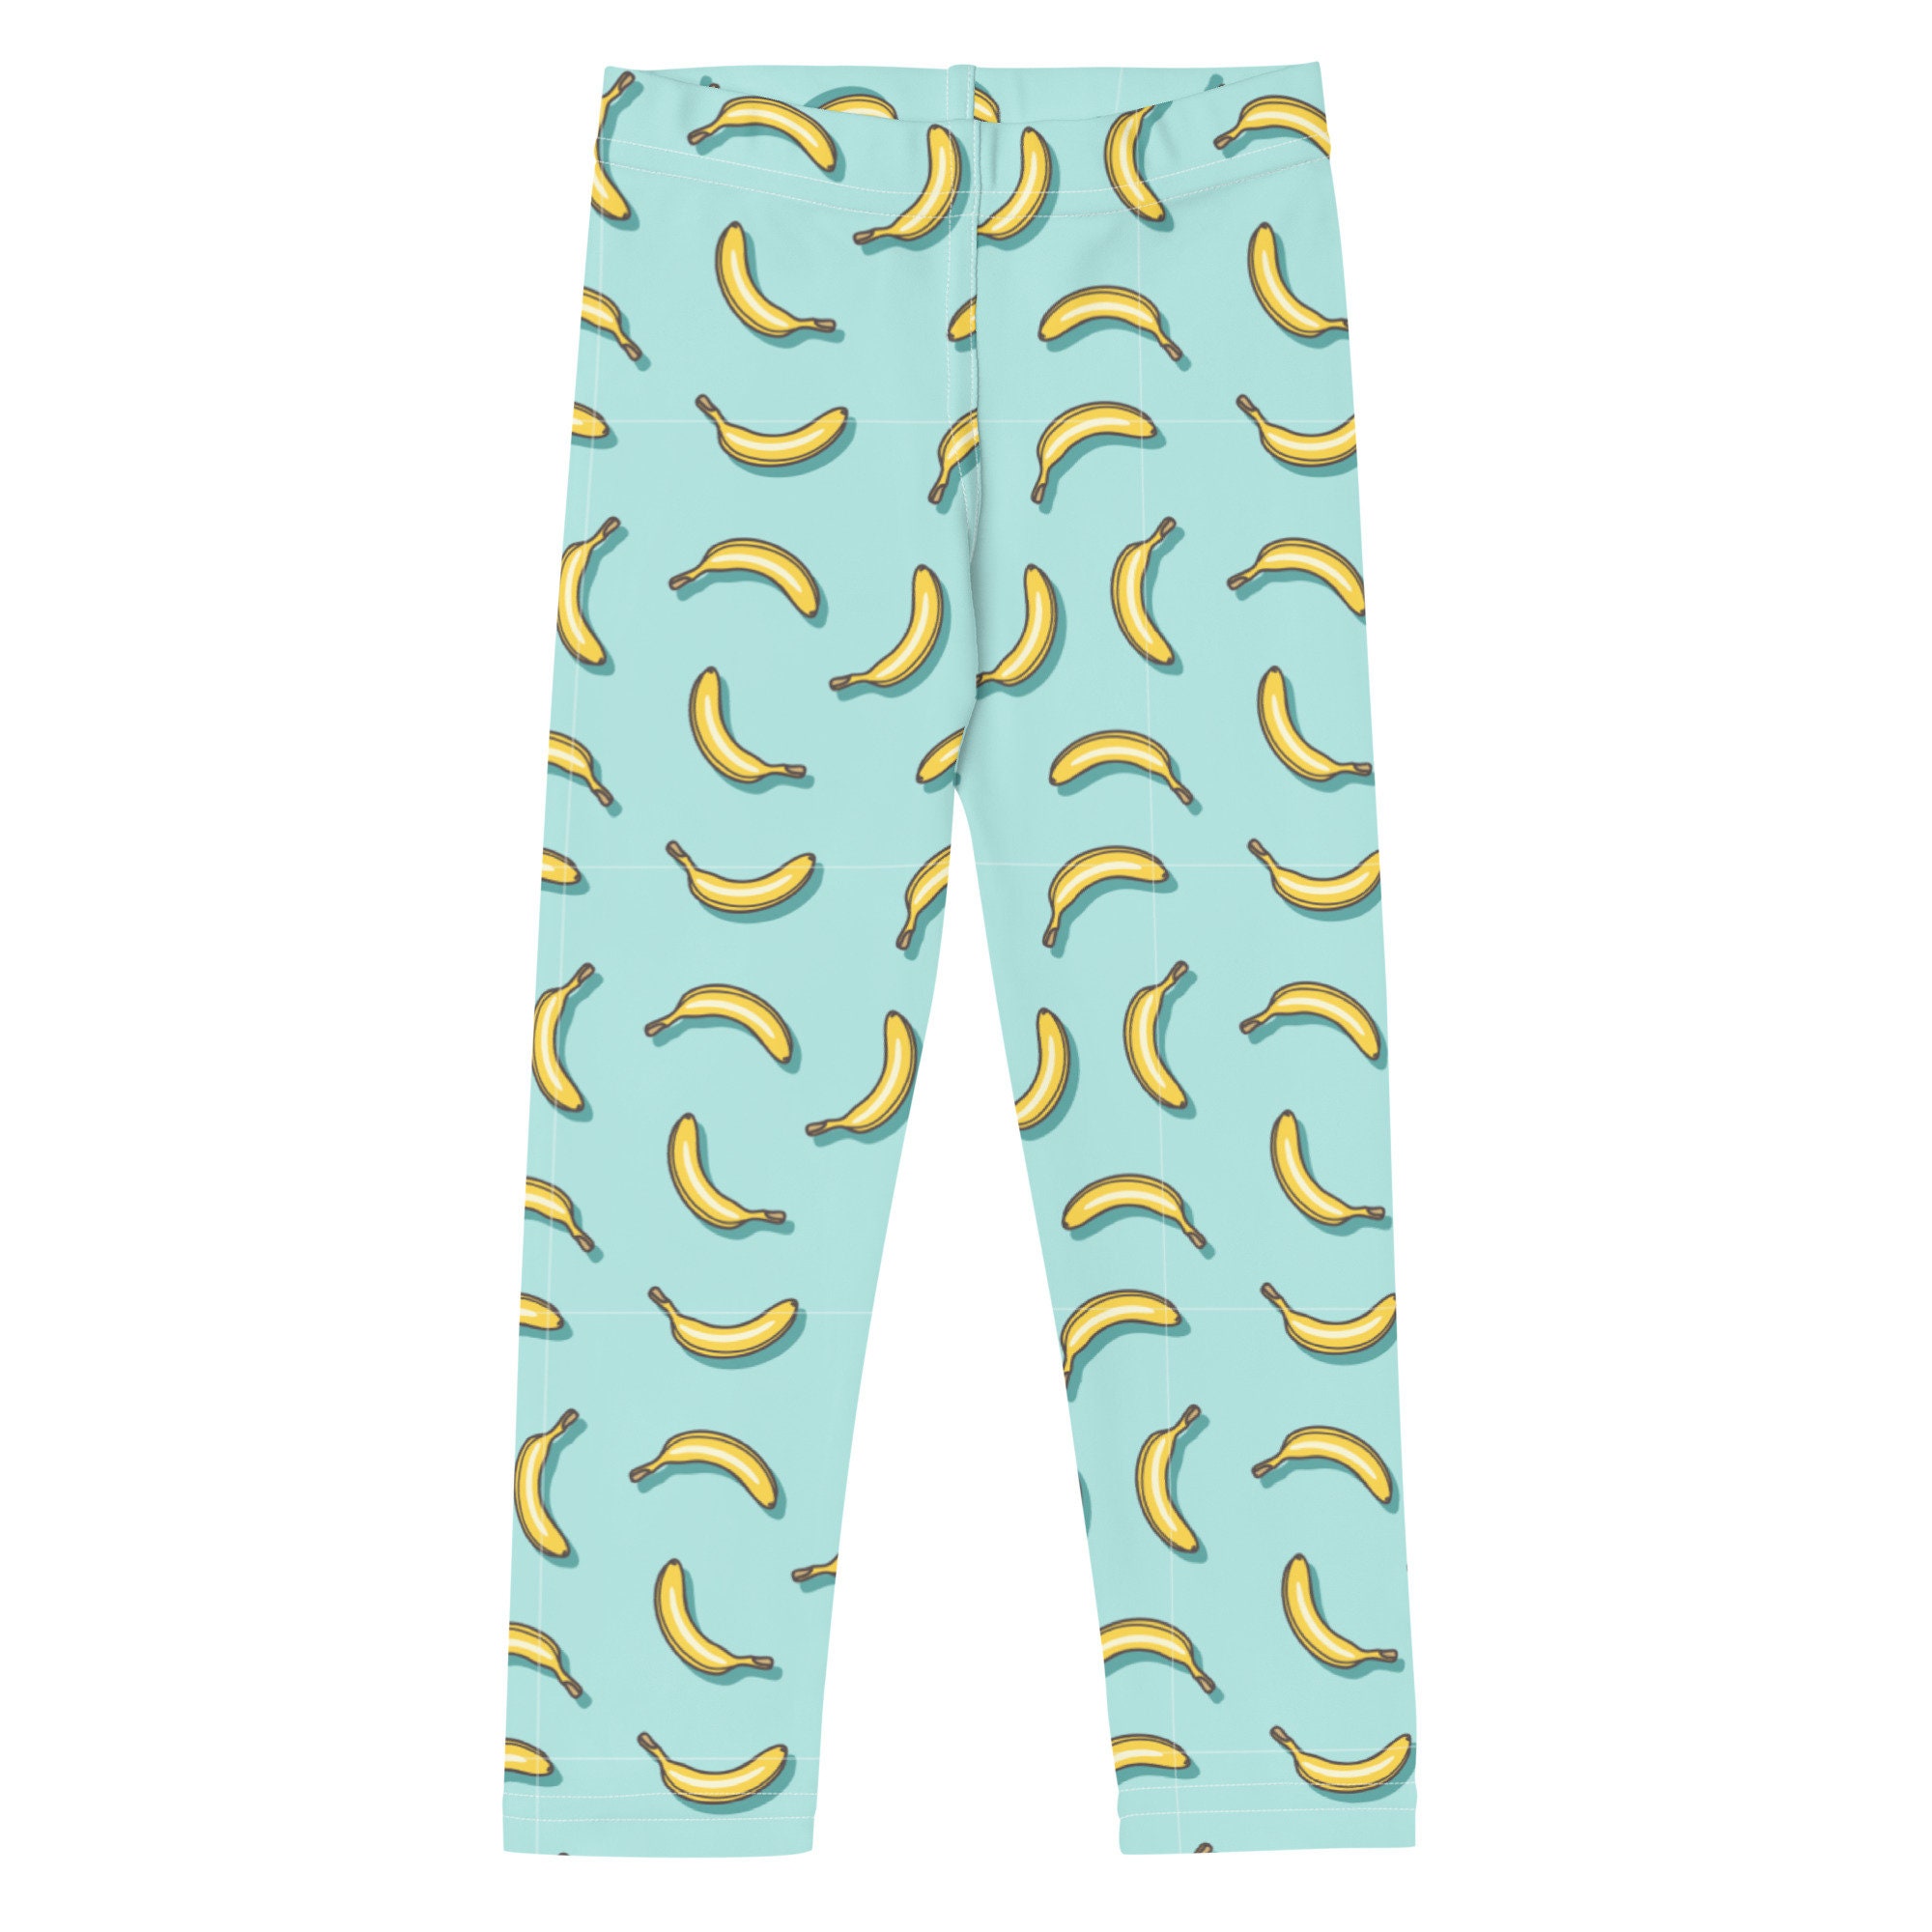 These Leggings Are Bananas Recycled Leggings With Pockets With All